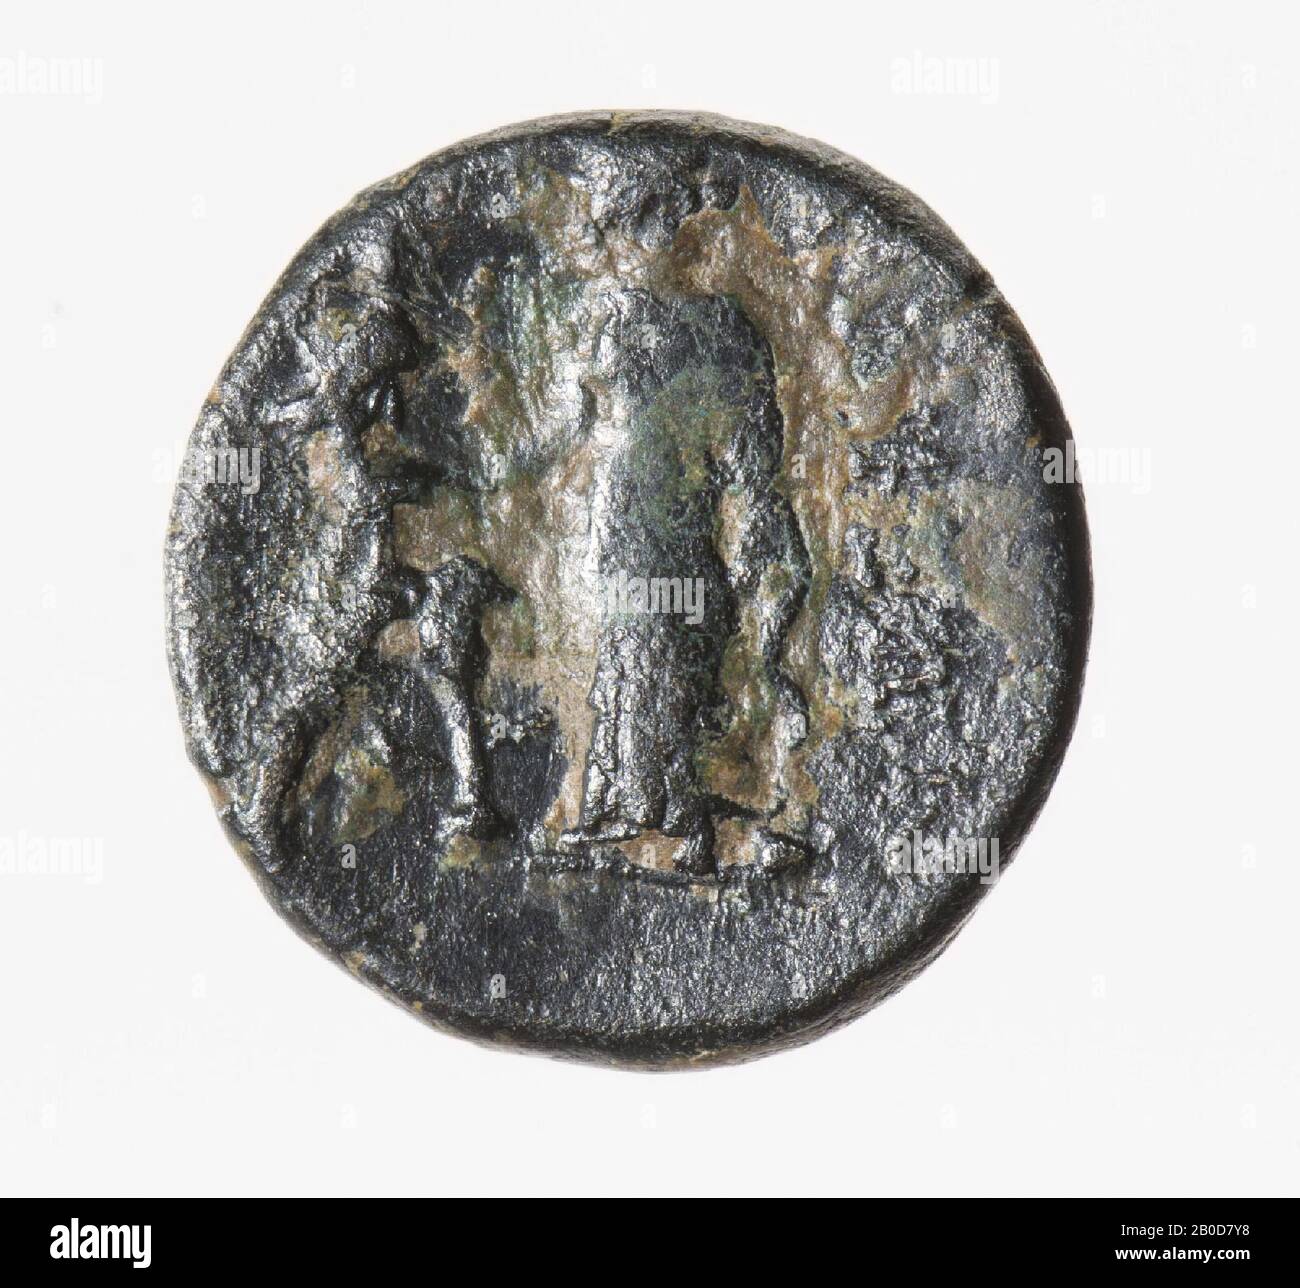 Obverse: Bust of woman, right, with stephane. Worn out. Reverse: Goddess, standing, right arm pointing to Stock Photo